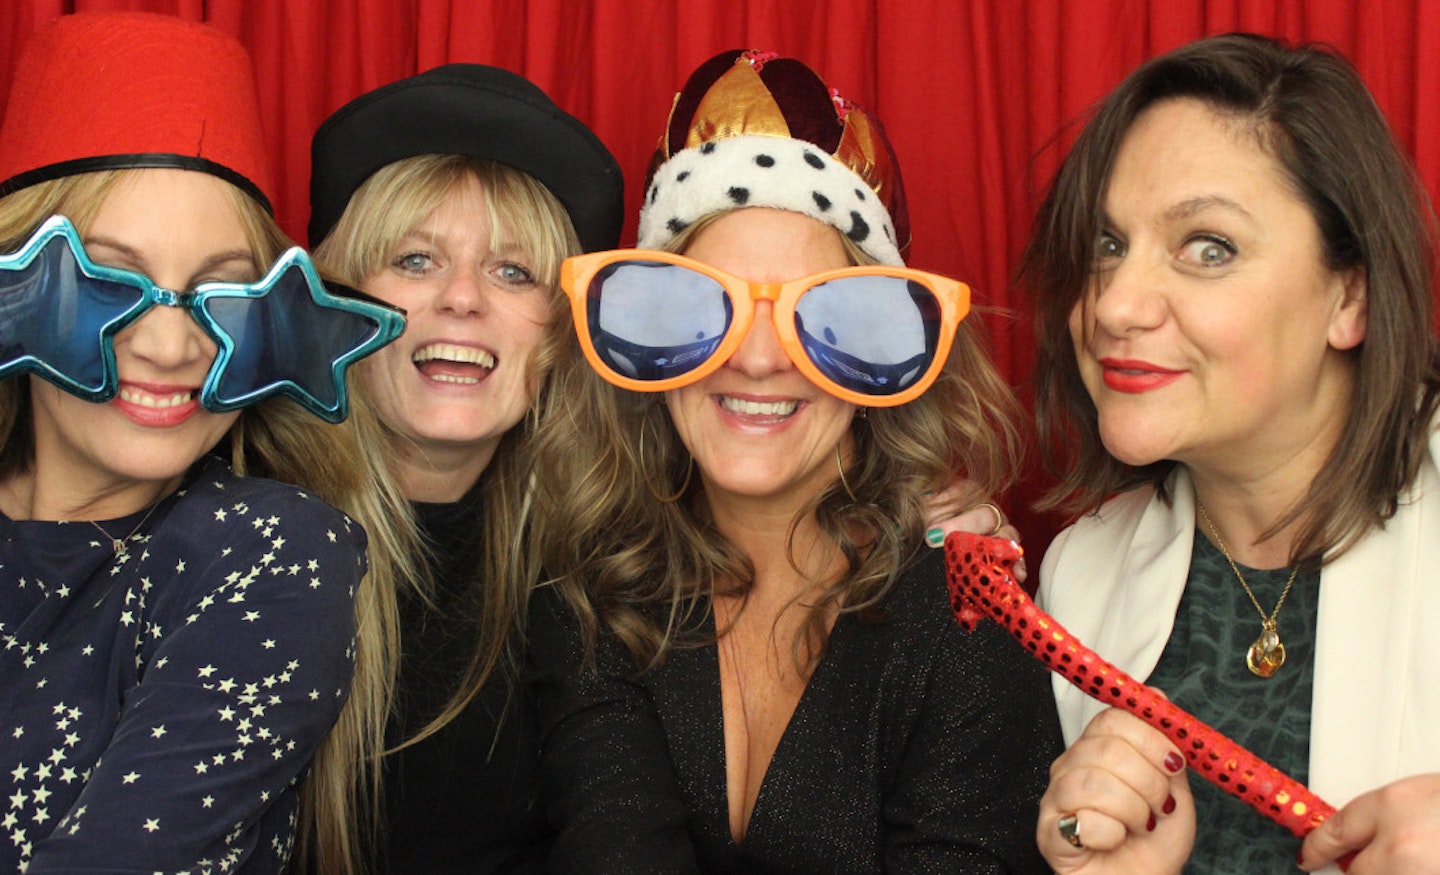 Inside Jane Bruton's Photo Booth